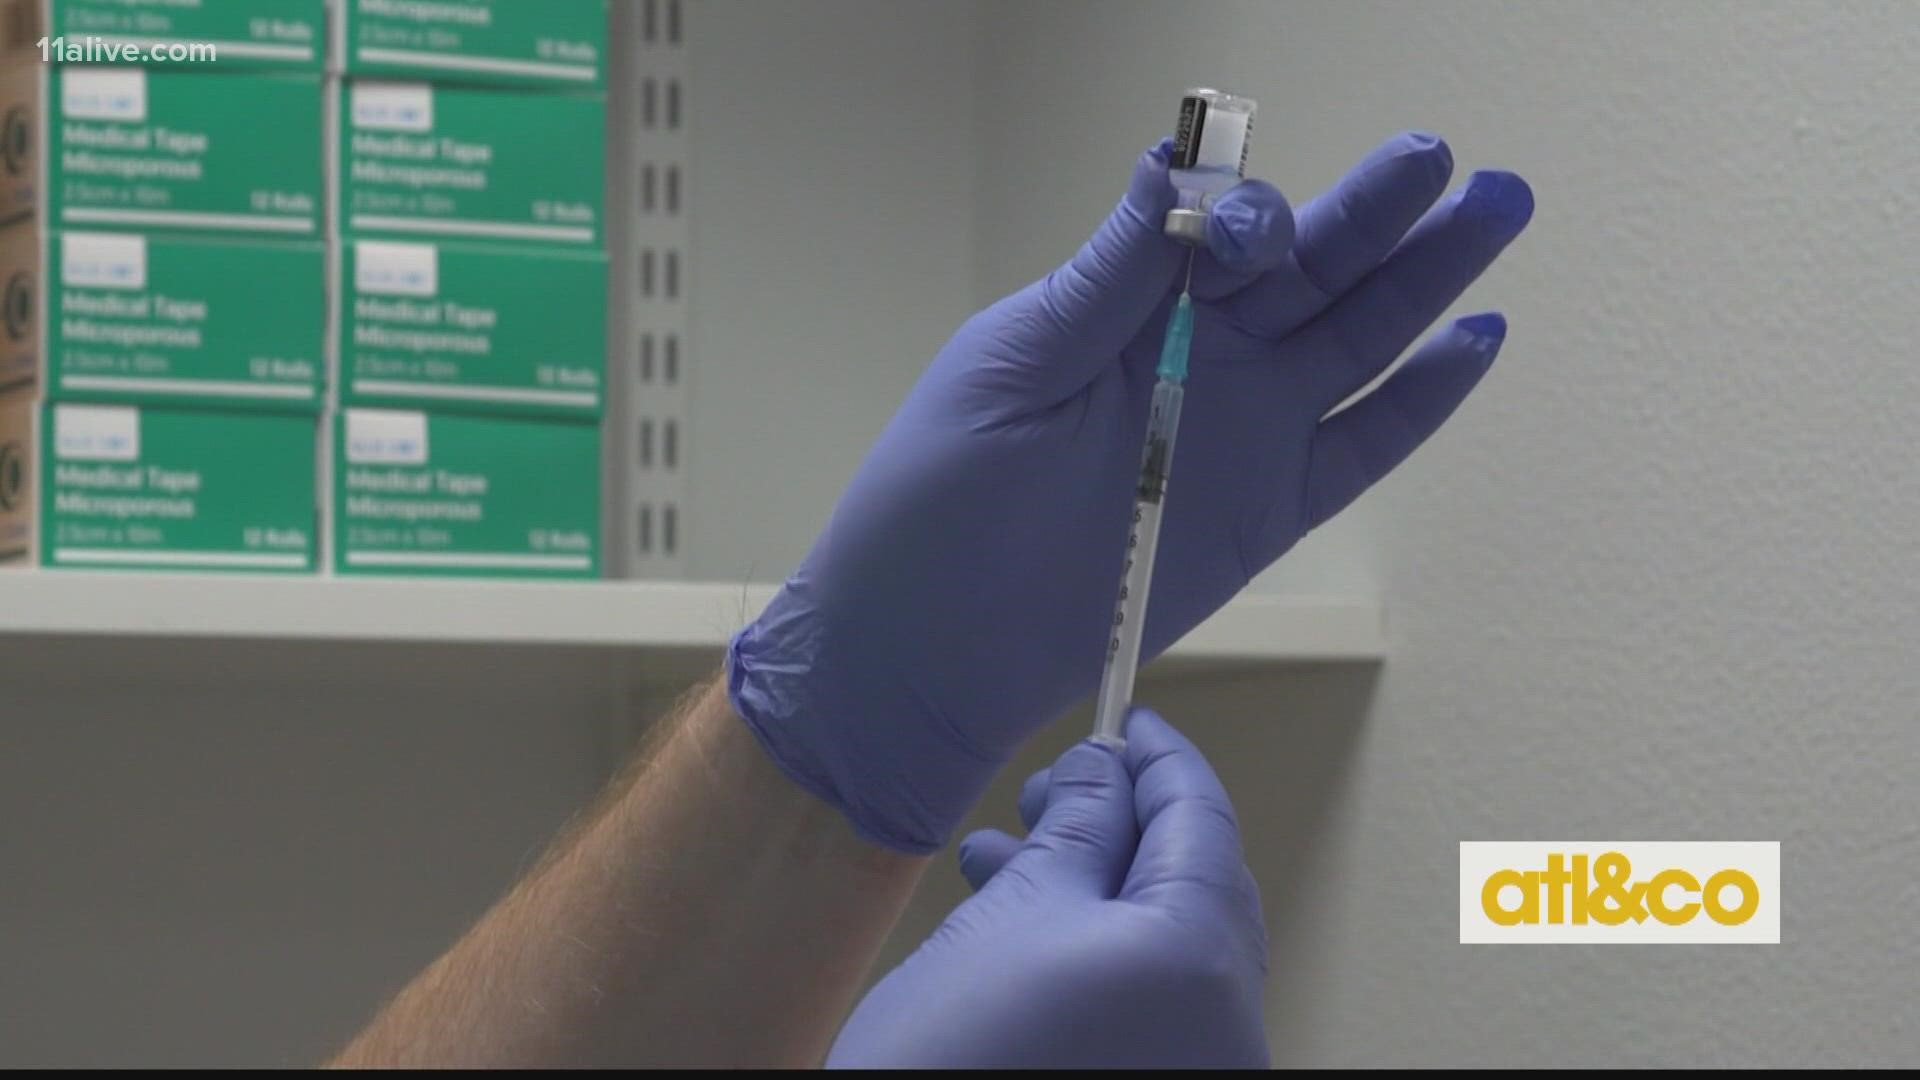 11Alive medical contributor Dr. Sujatha Reddy has the latest information on the third dose of the COVID-19 vaccine.